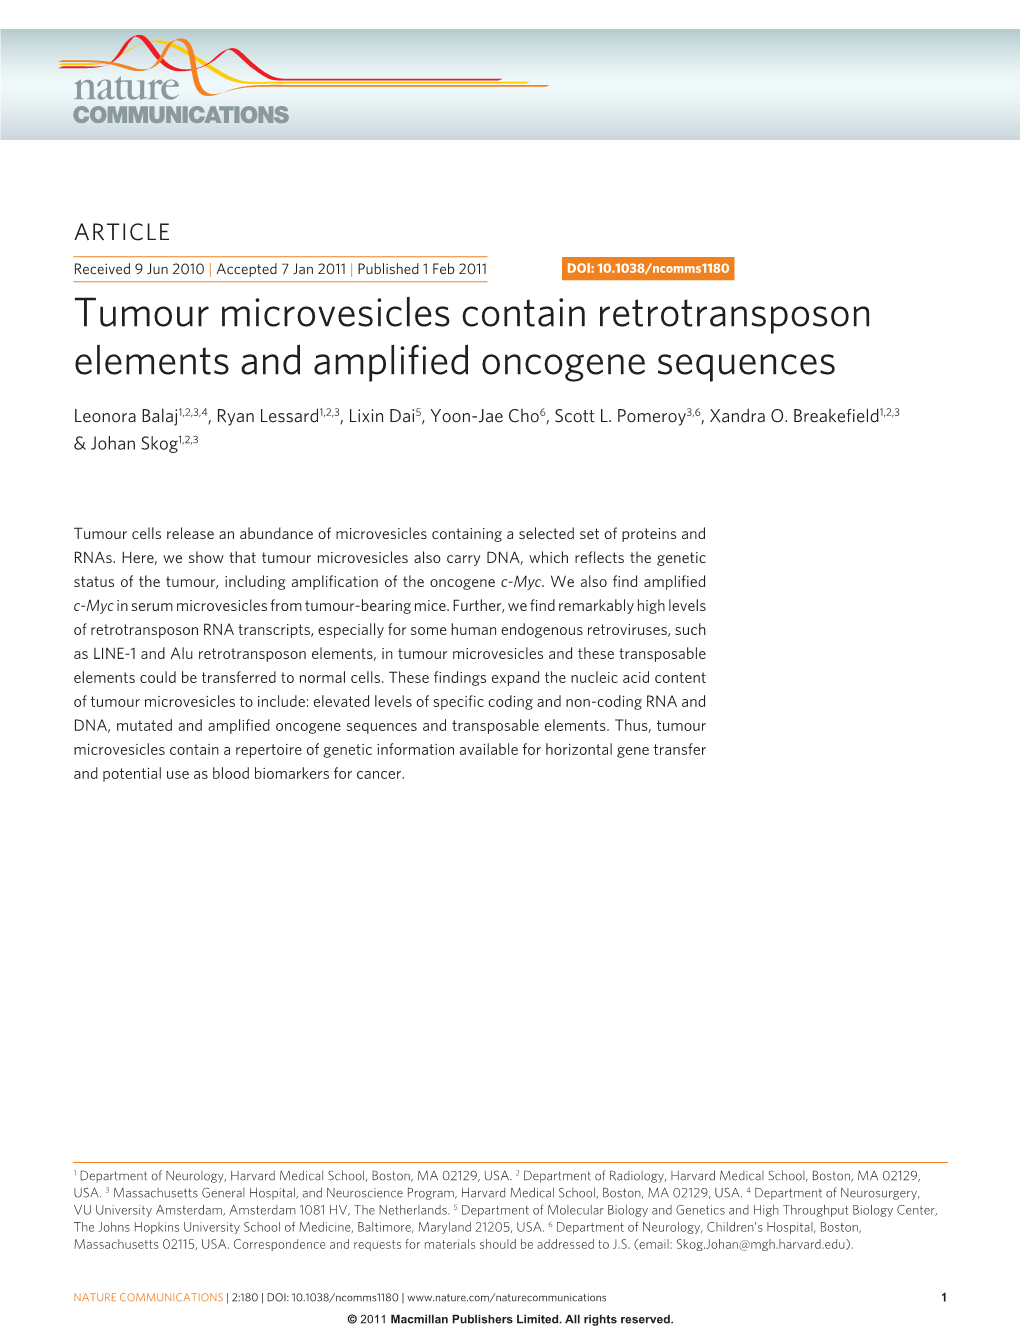 Tumour Microvesicles Contain Retrotransposon Elements and Amplified Oncogene Sequences